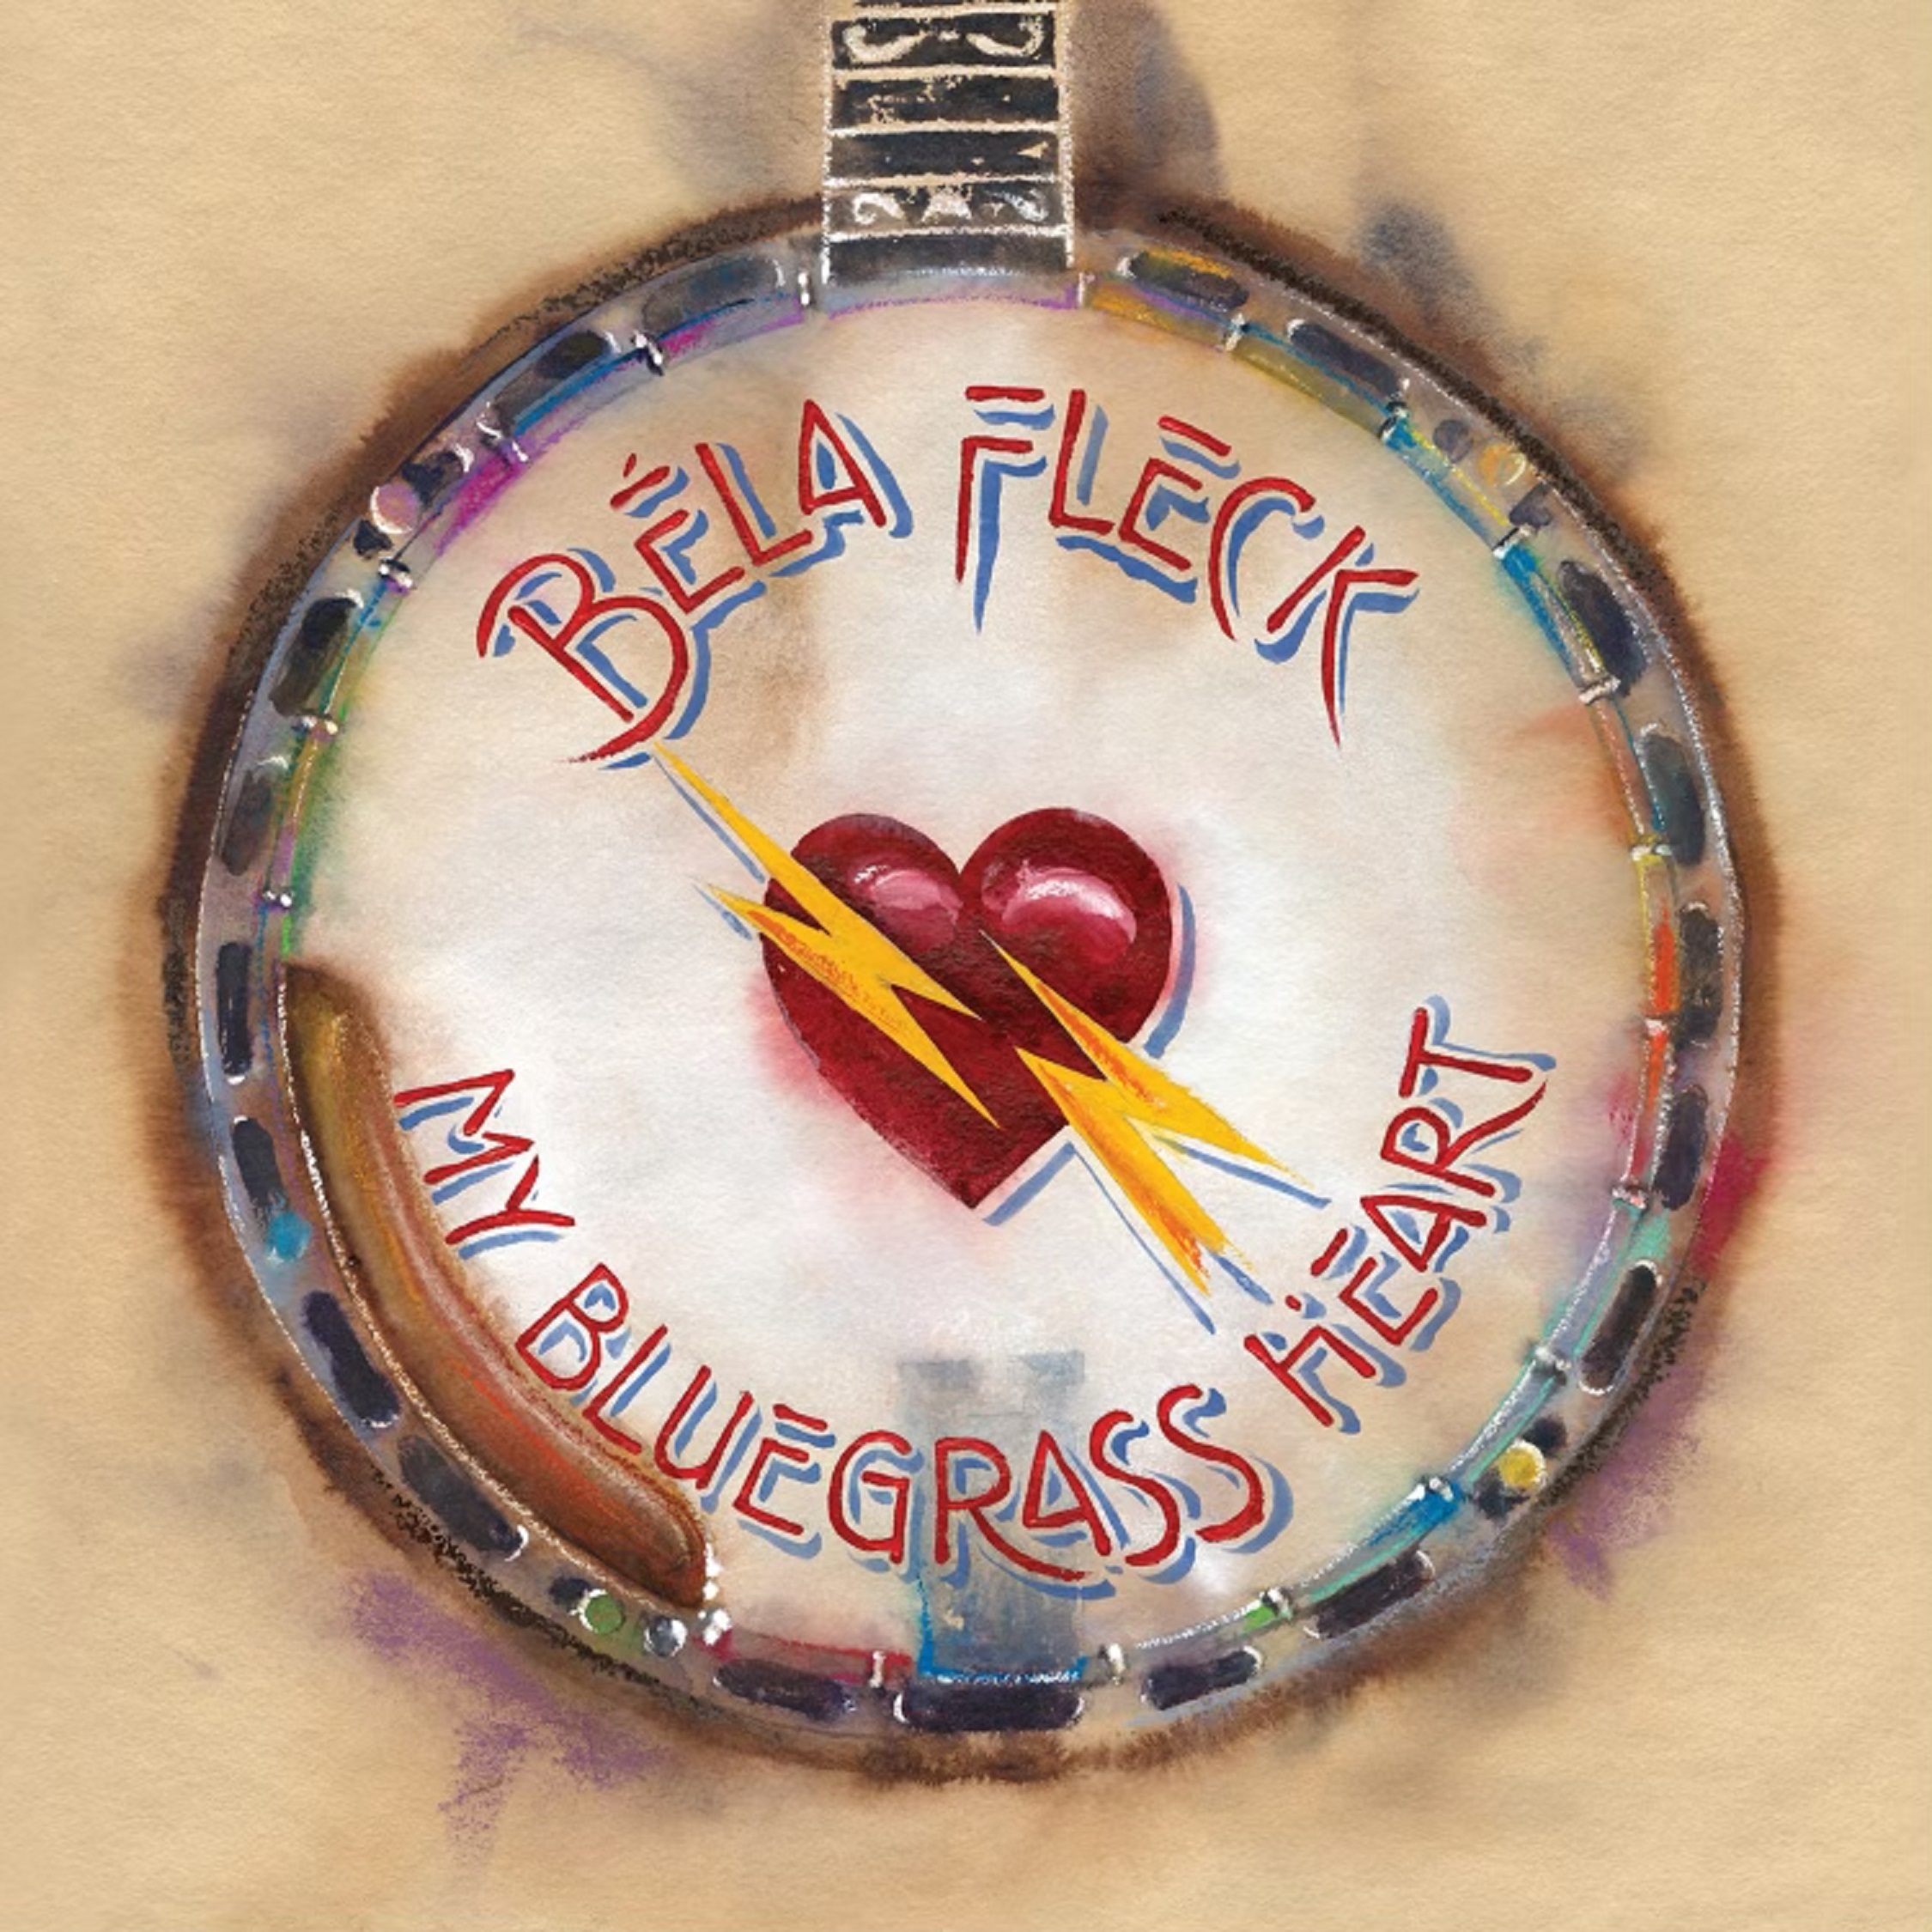 Béla Fleck releases My Bluegrass Heart Today